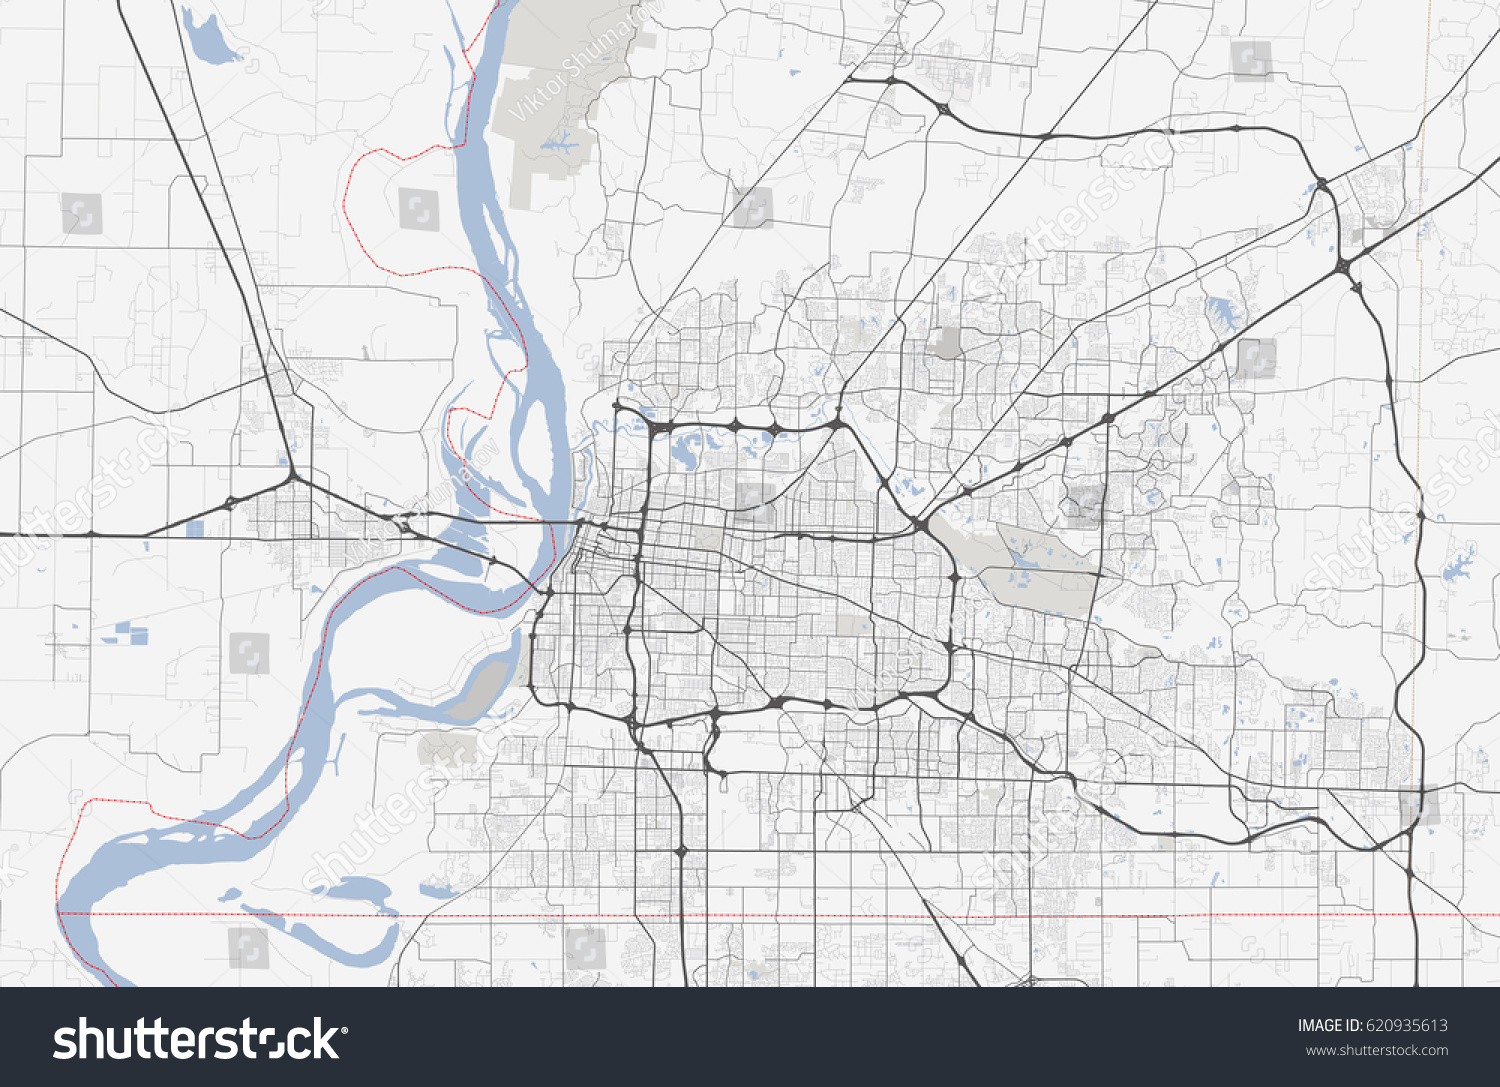 Stock Vector Map Memphis City Tennessee Road 620935613 